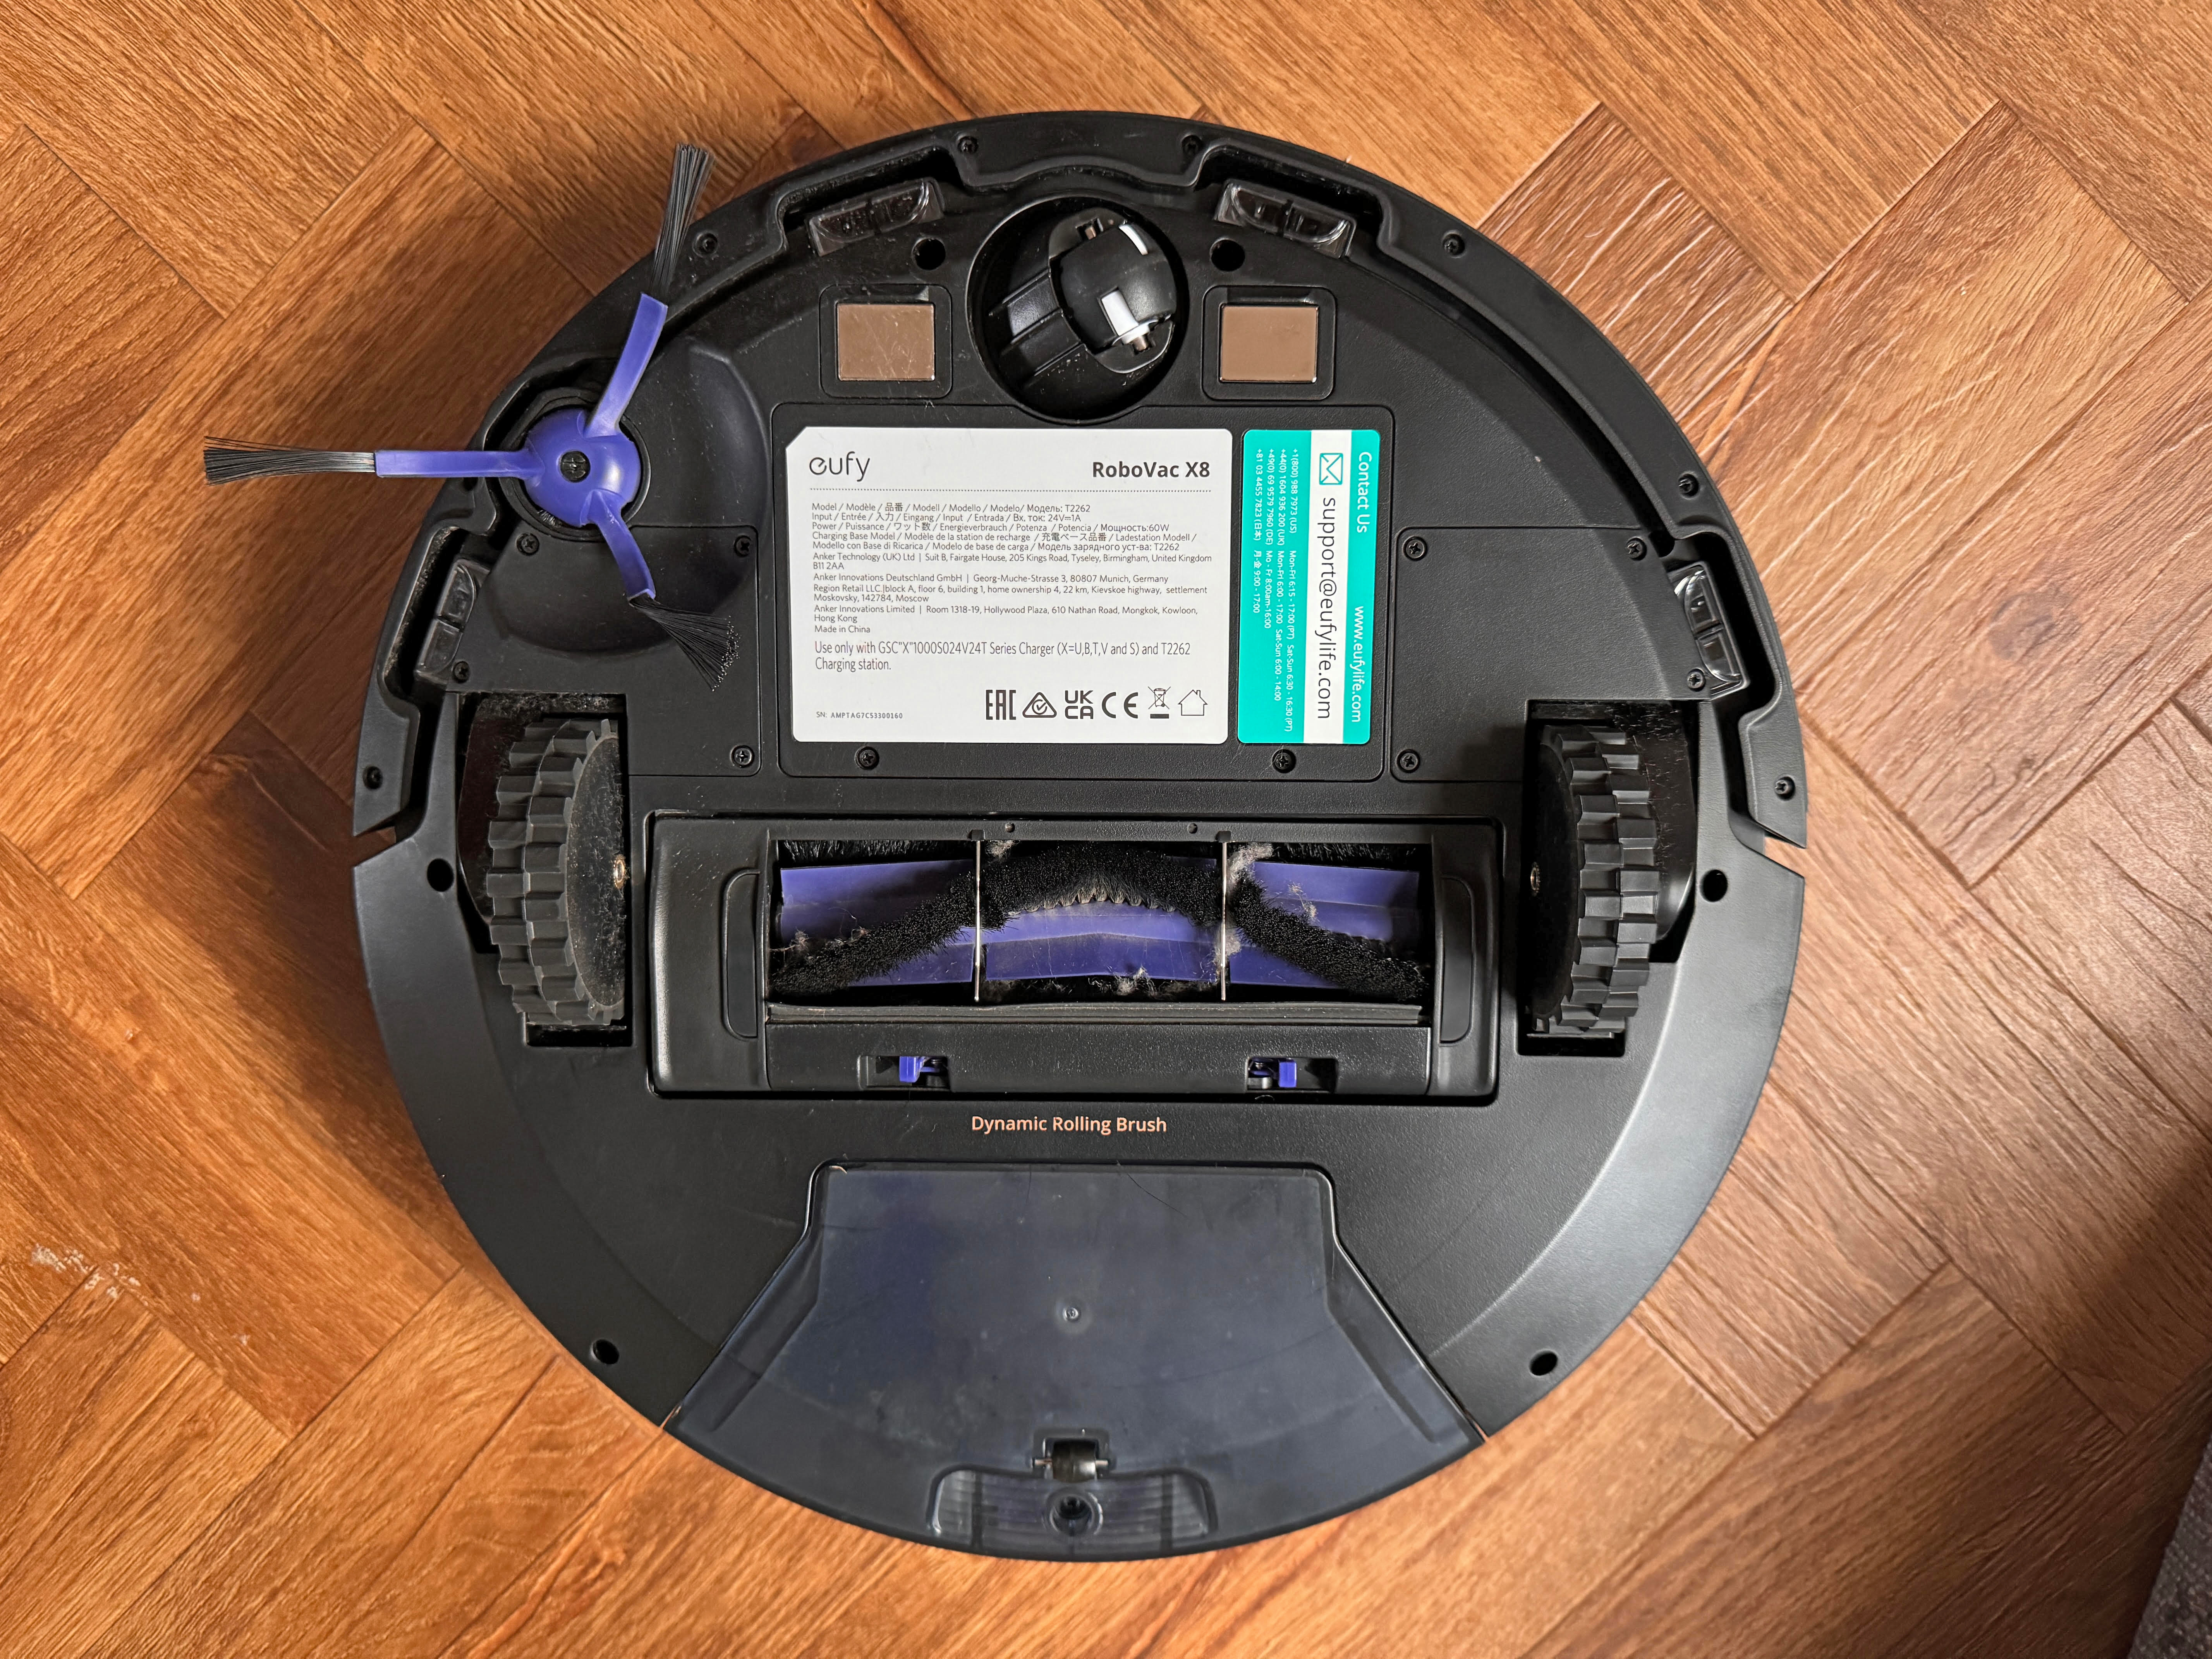 The underside of the Robovac X8 reveals its detachable brush and roller brush